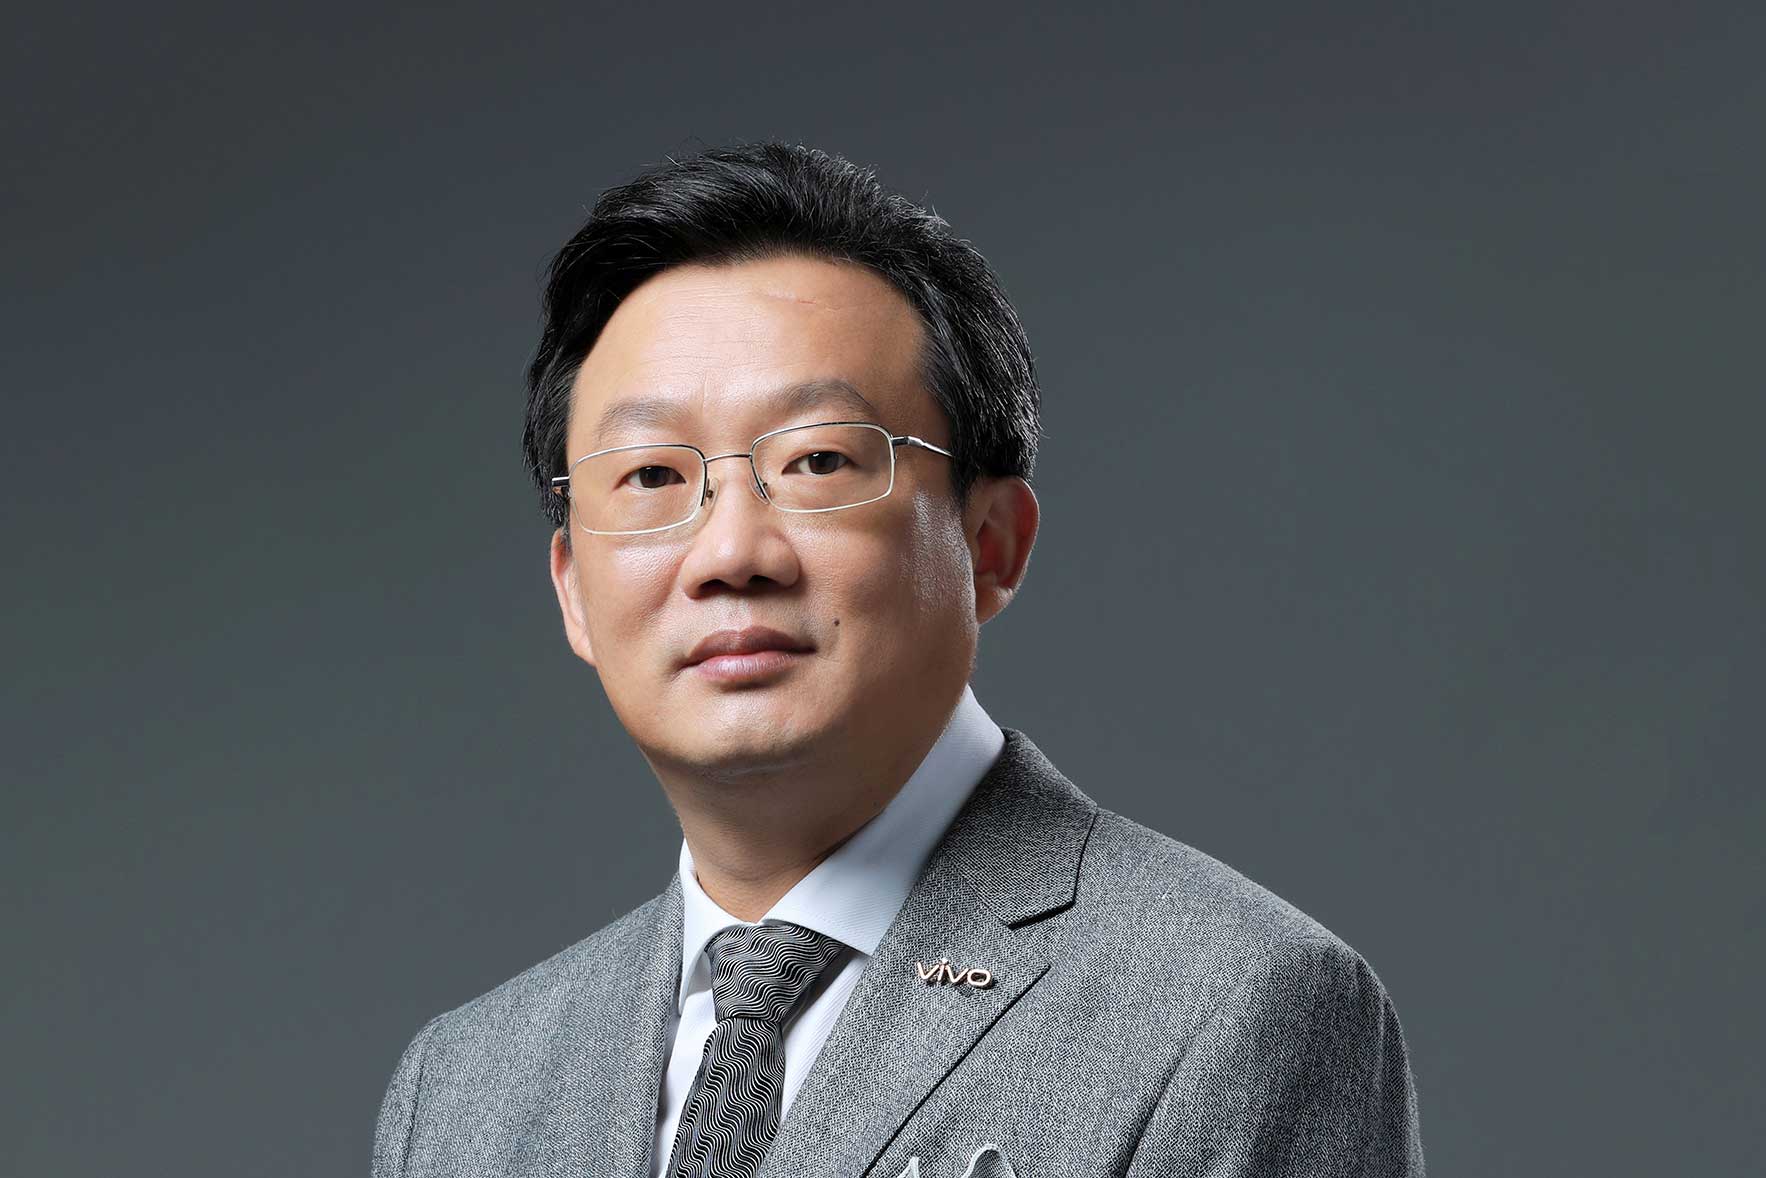 vivo’s President and CEO Shen Wei: Great products and extraordinary services are the core path to success in the Market